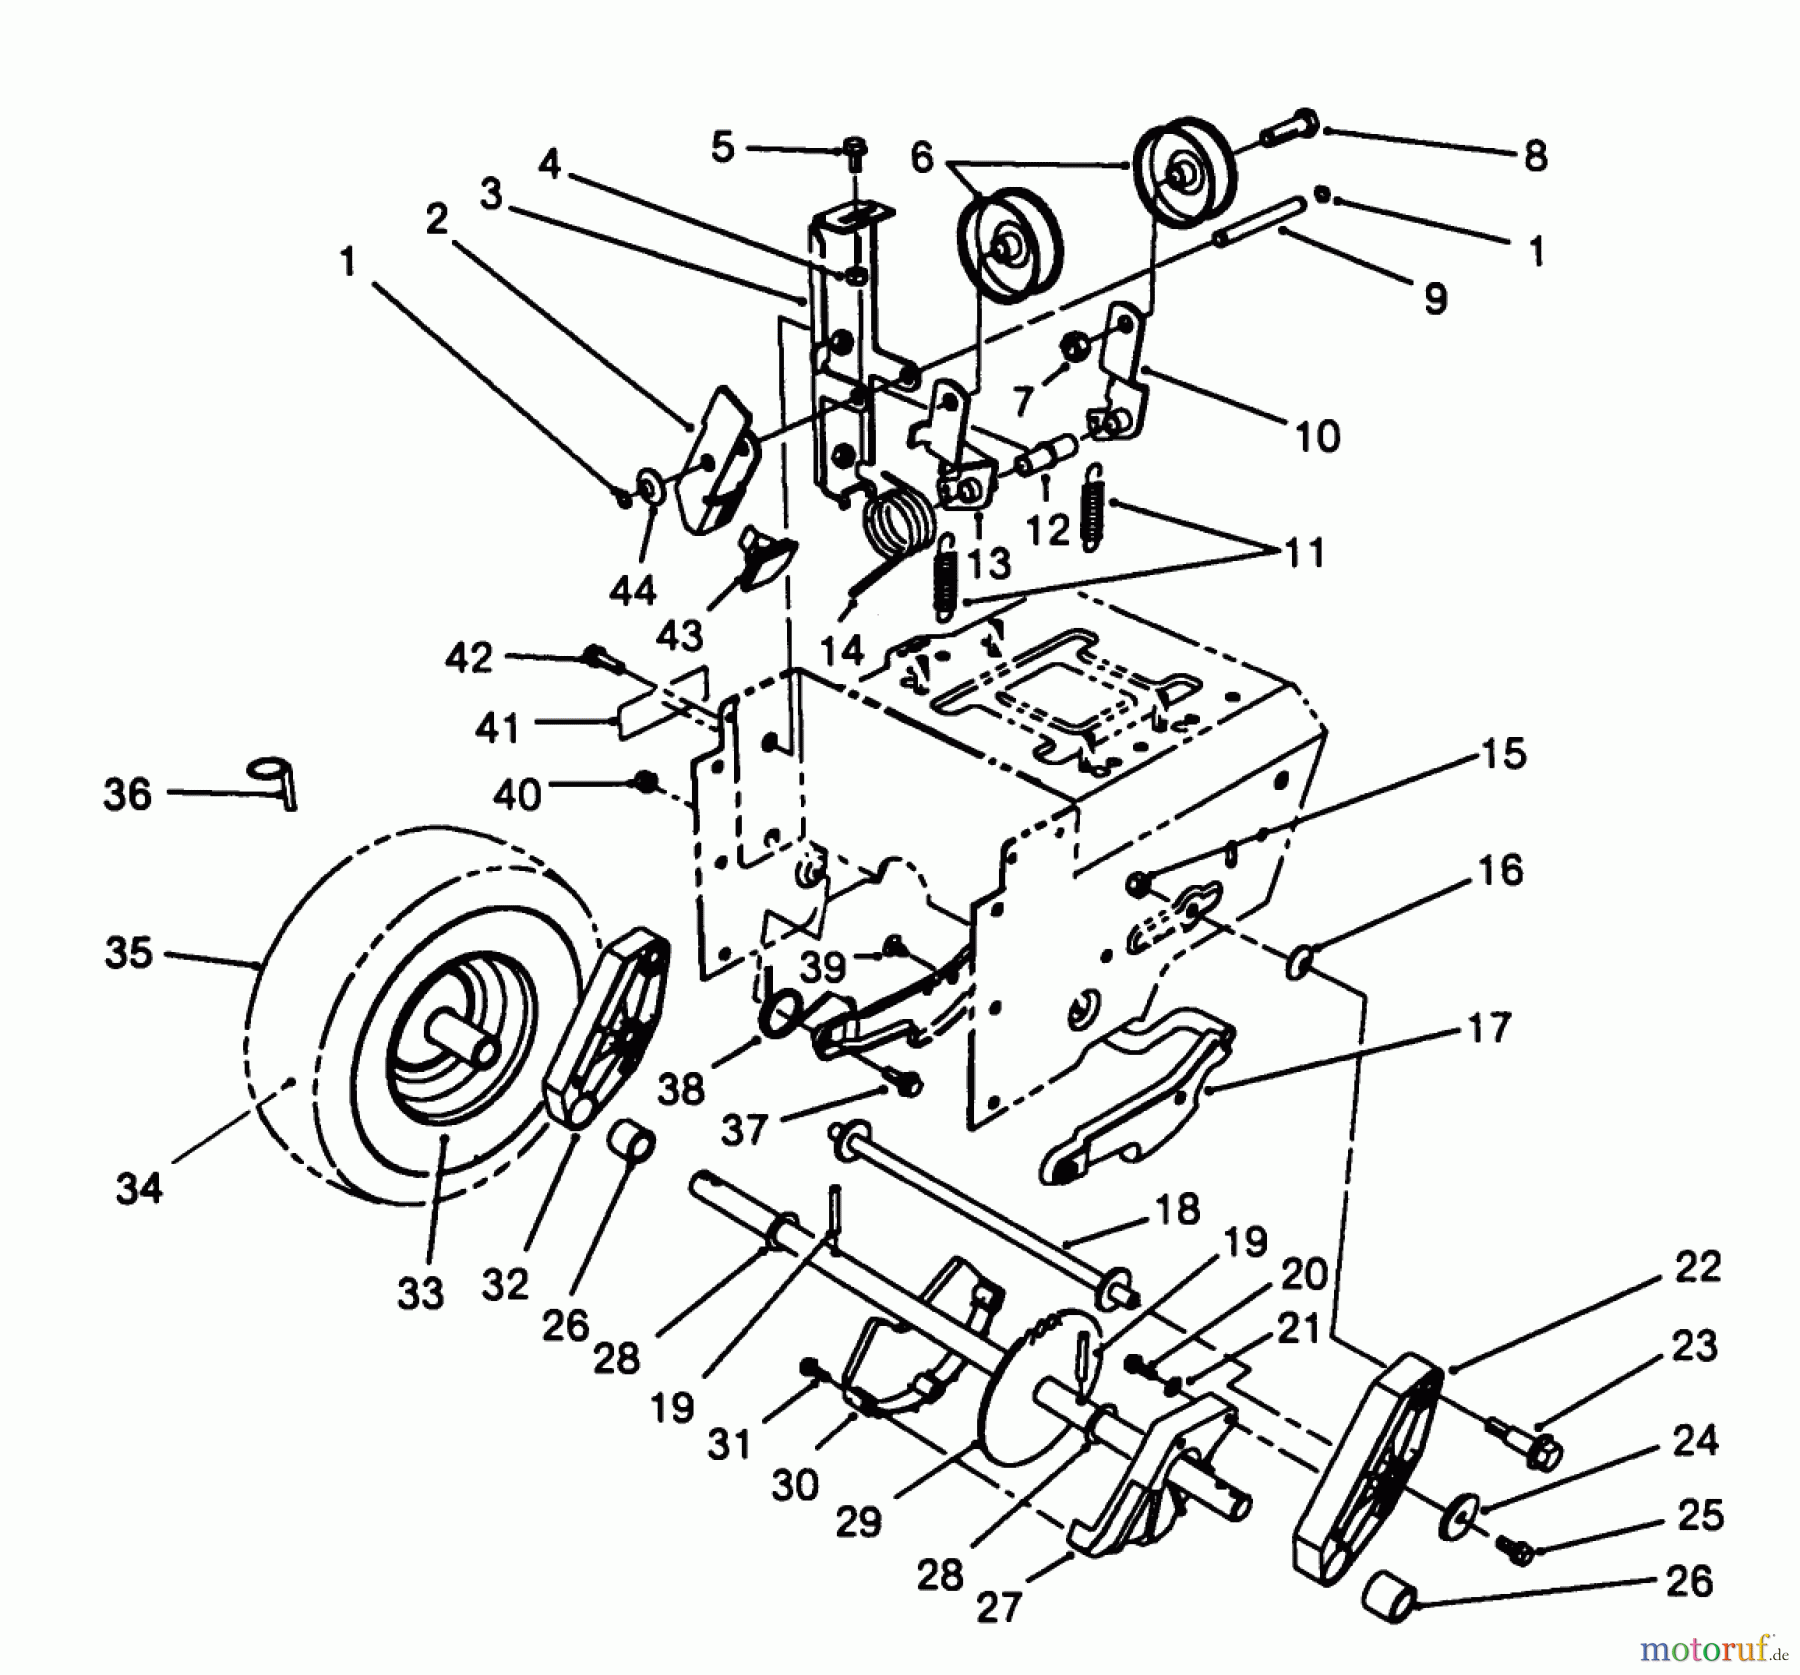  Toro Neu Snow Blowers/Snow Throwers Seite 1 38543 (824) - Toro 824 Power Shift Snowthrower, 1988 (8000001-8999999) TRACTION DRIVE ASSEMBLY